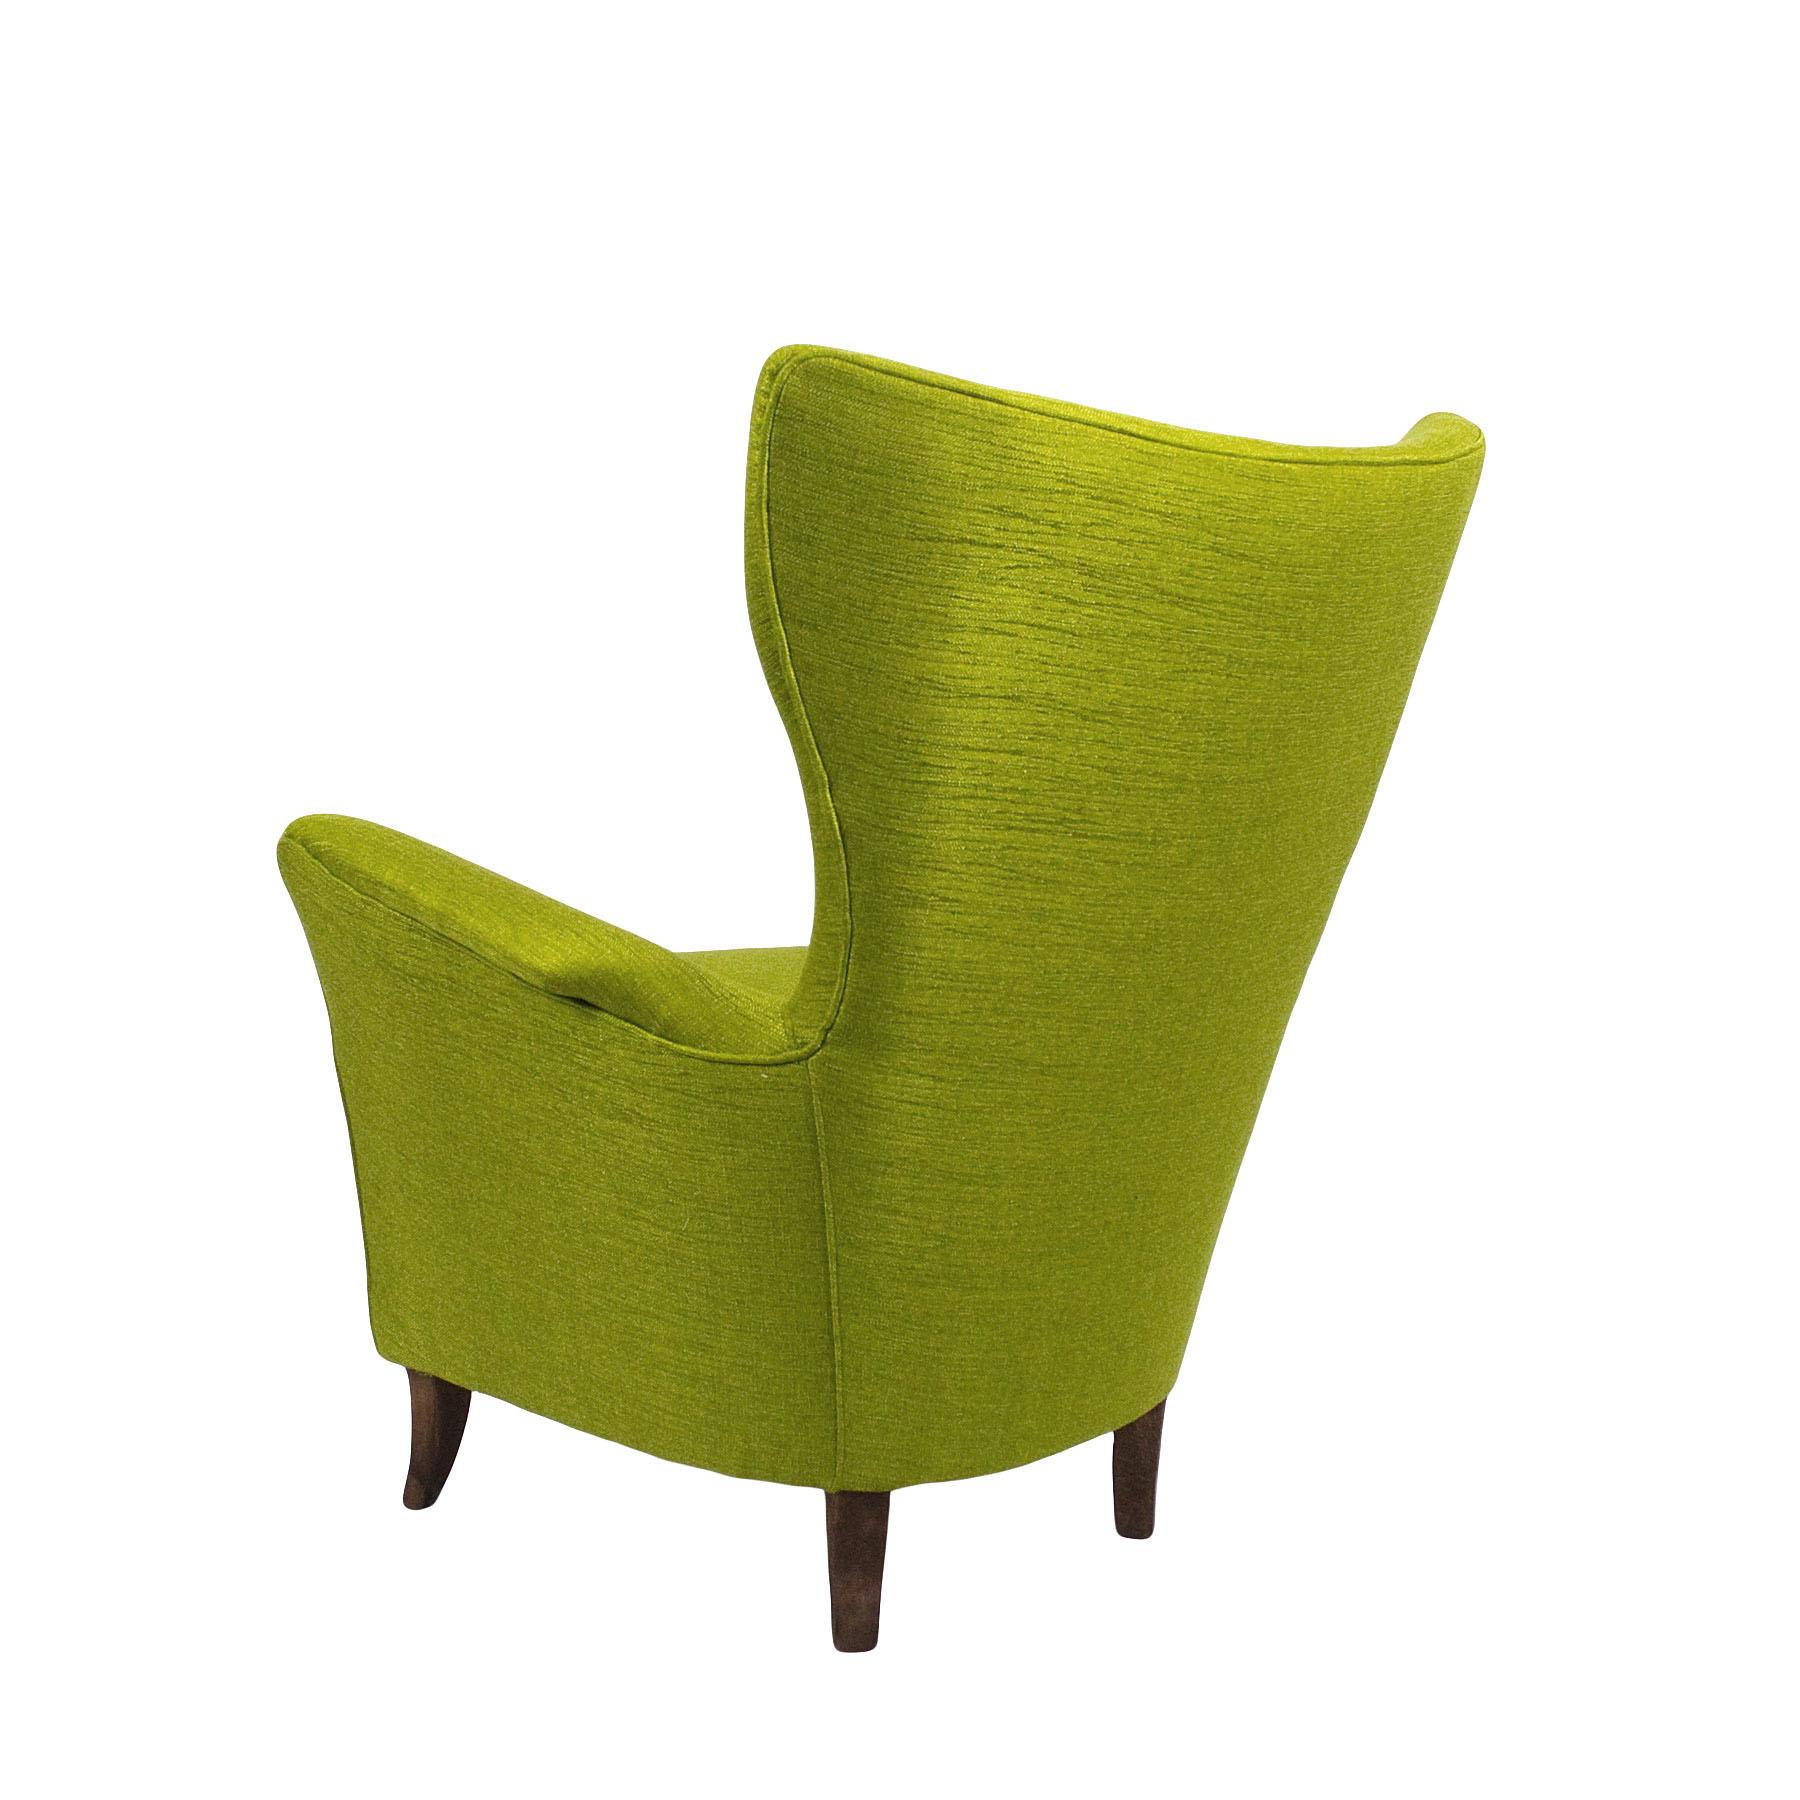 Mid-20th Century Pair of Mid-Century Modern Flared Back Armchairs in Anise Green Fabric - Italy